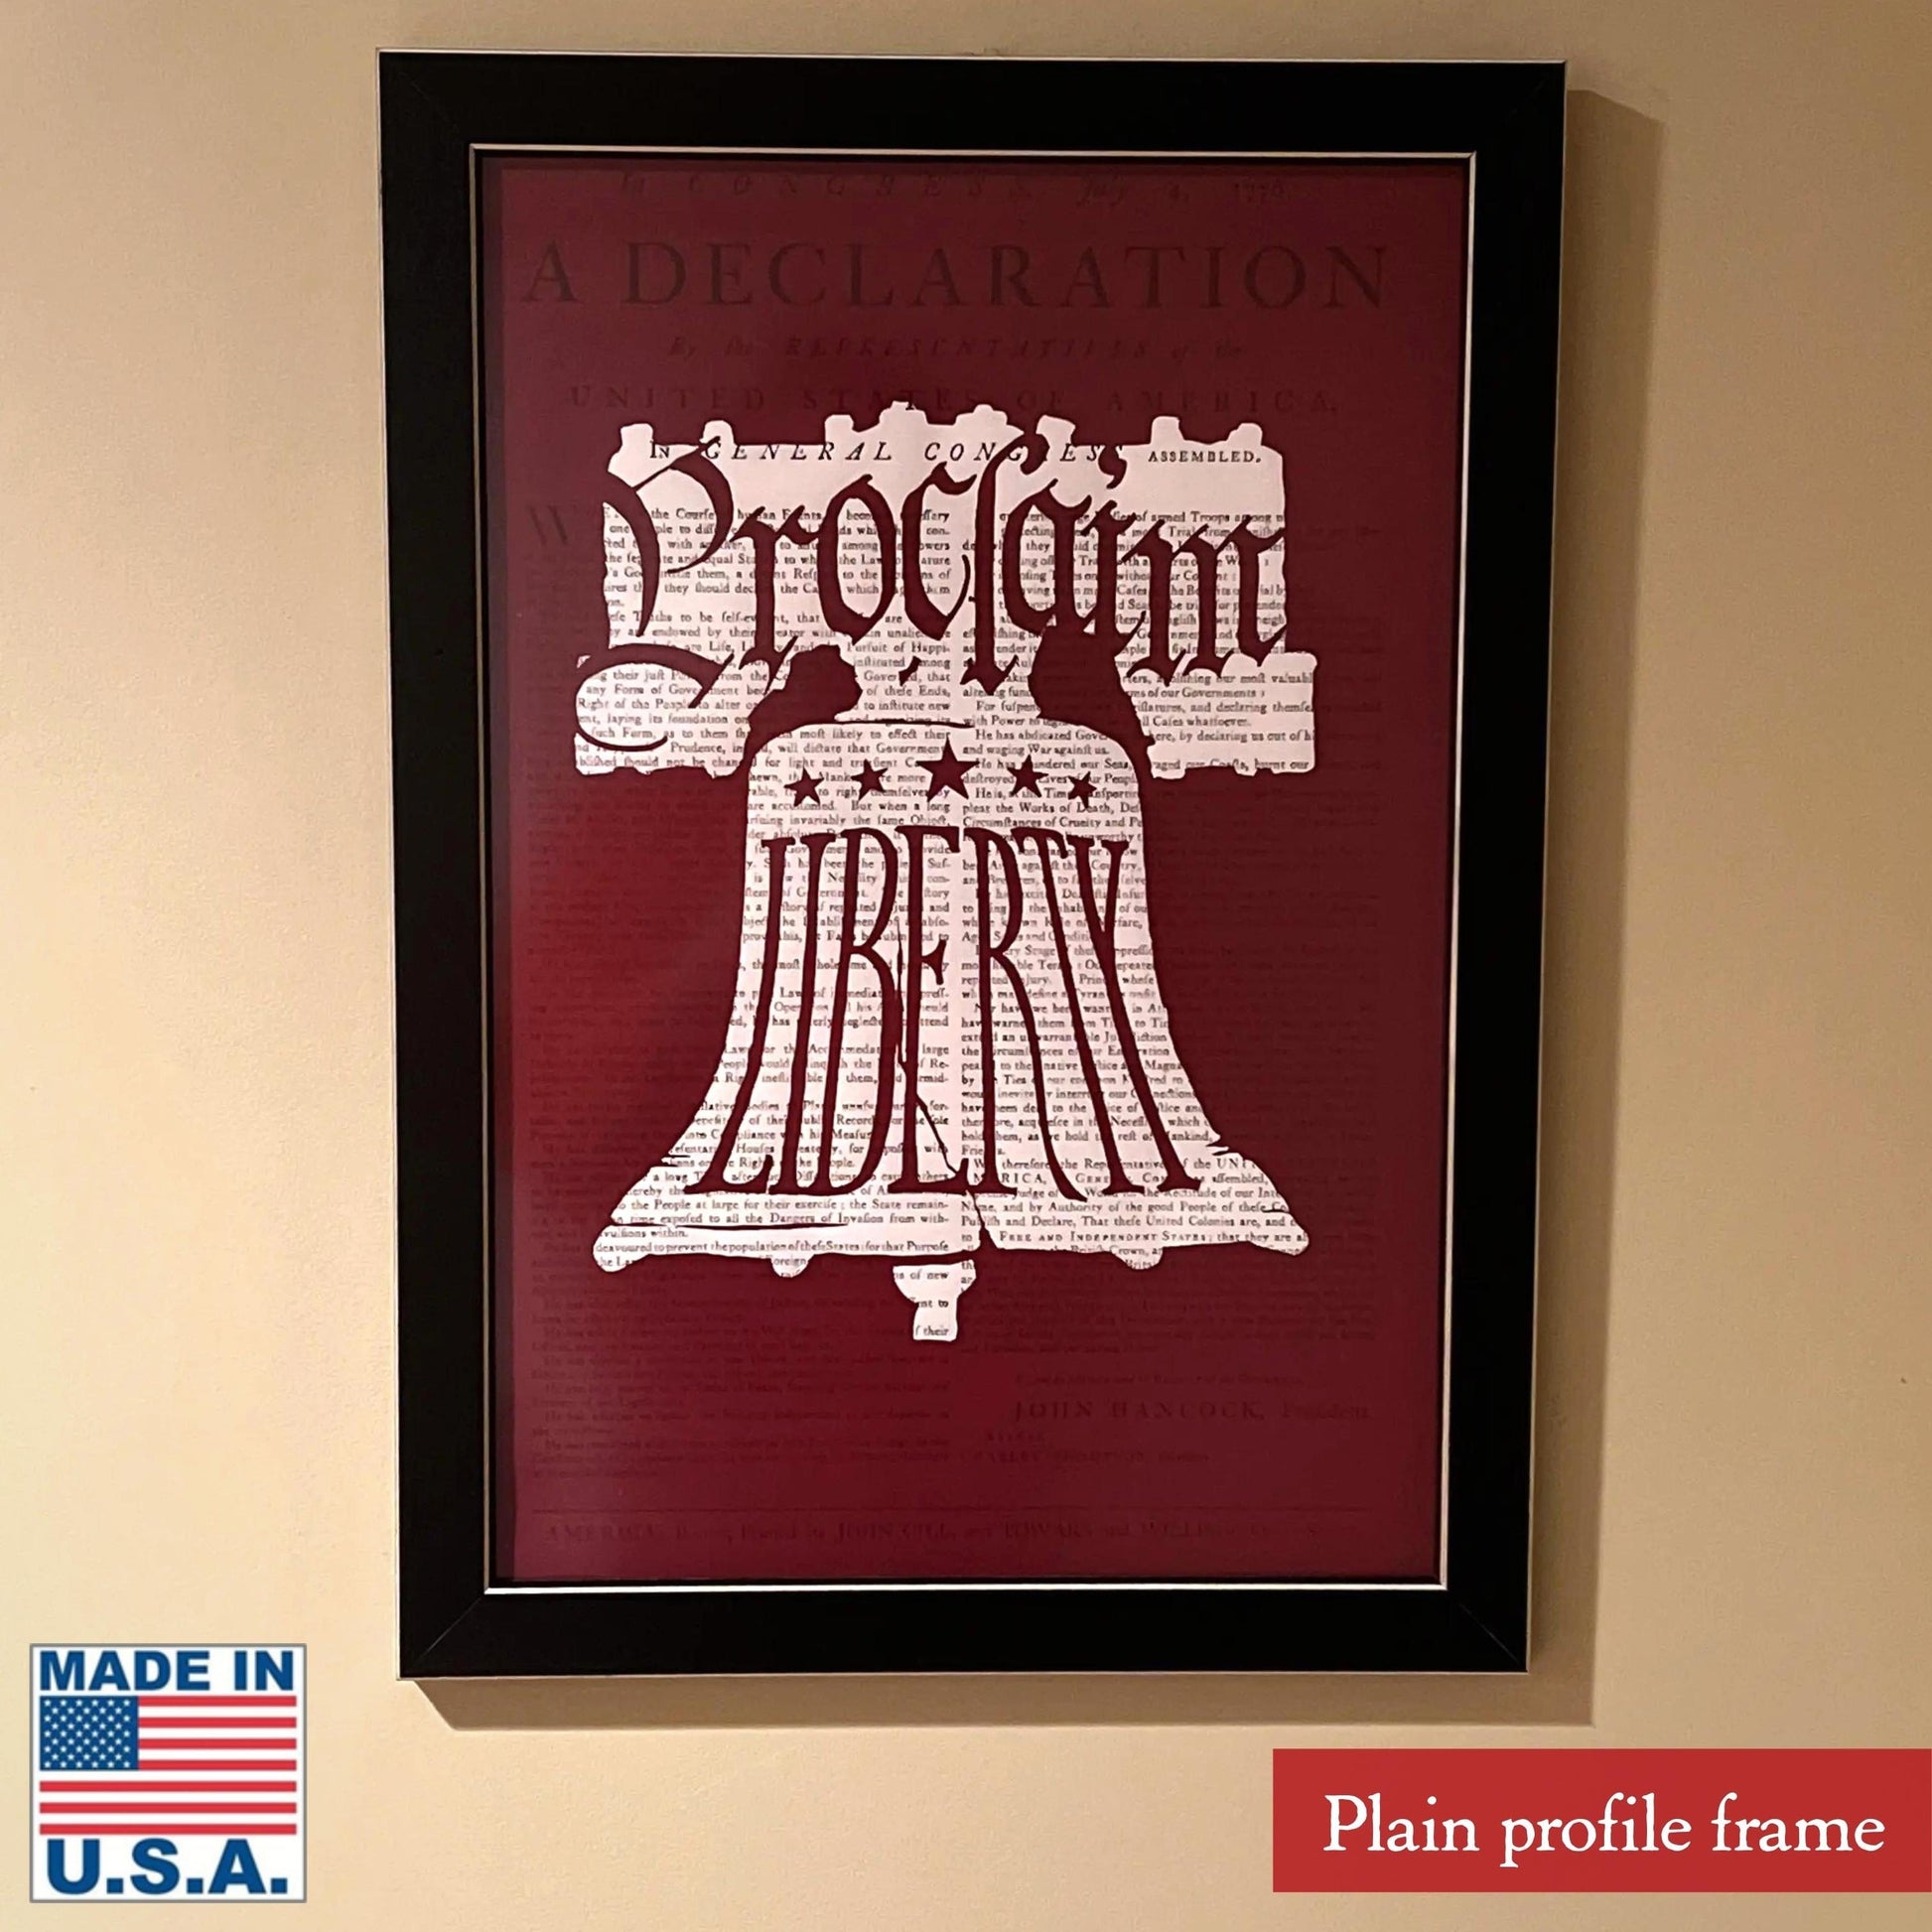 Plain profile frame of "Proclaim Liberty” on a Boston broadside of the Declaration of Independence from The History List store